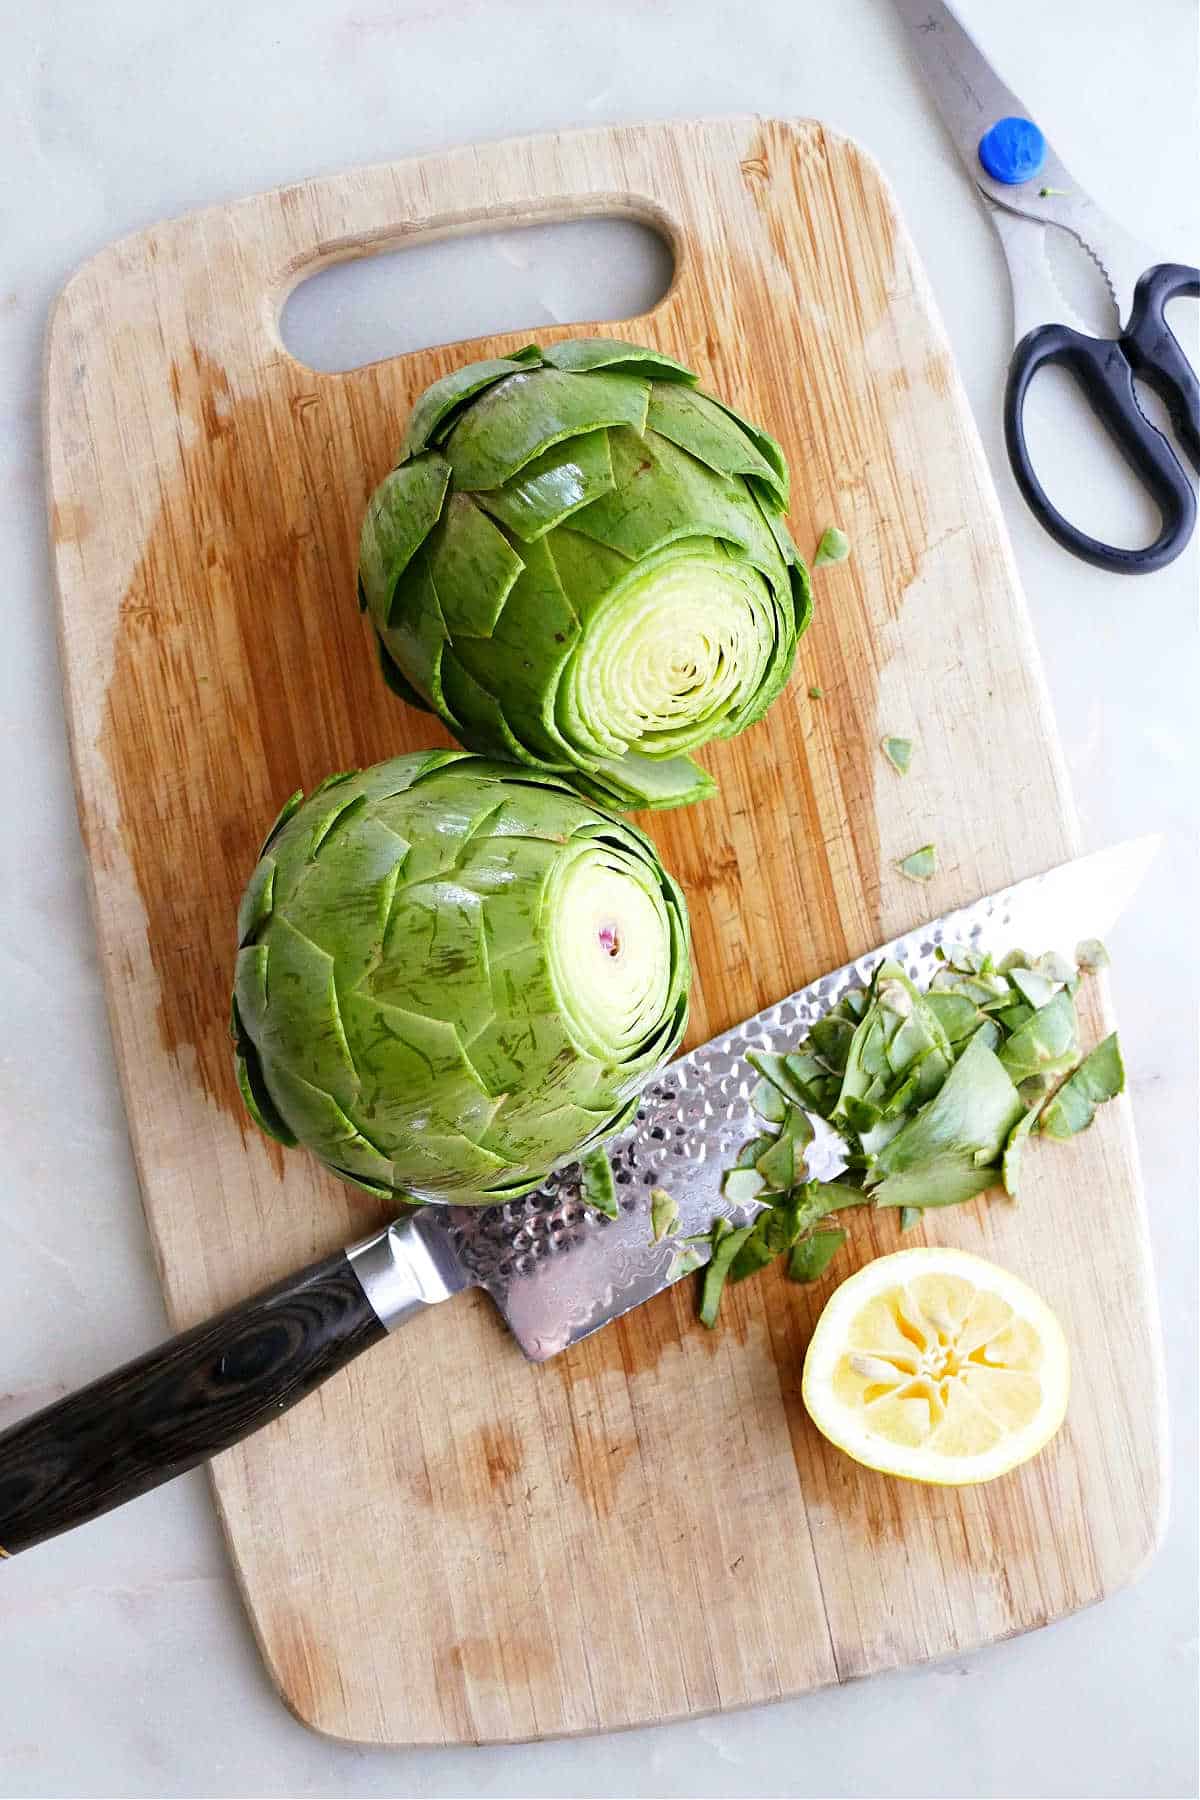 two artichokes trimmed with a knife on a cutting board next to a lemon